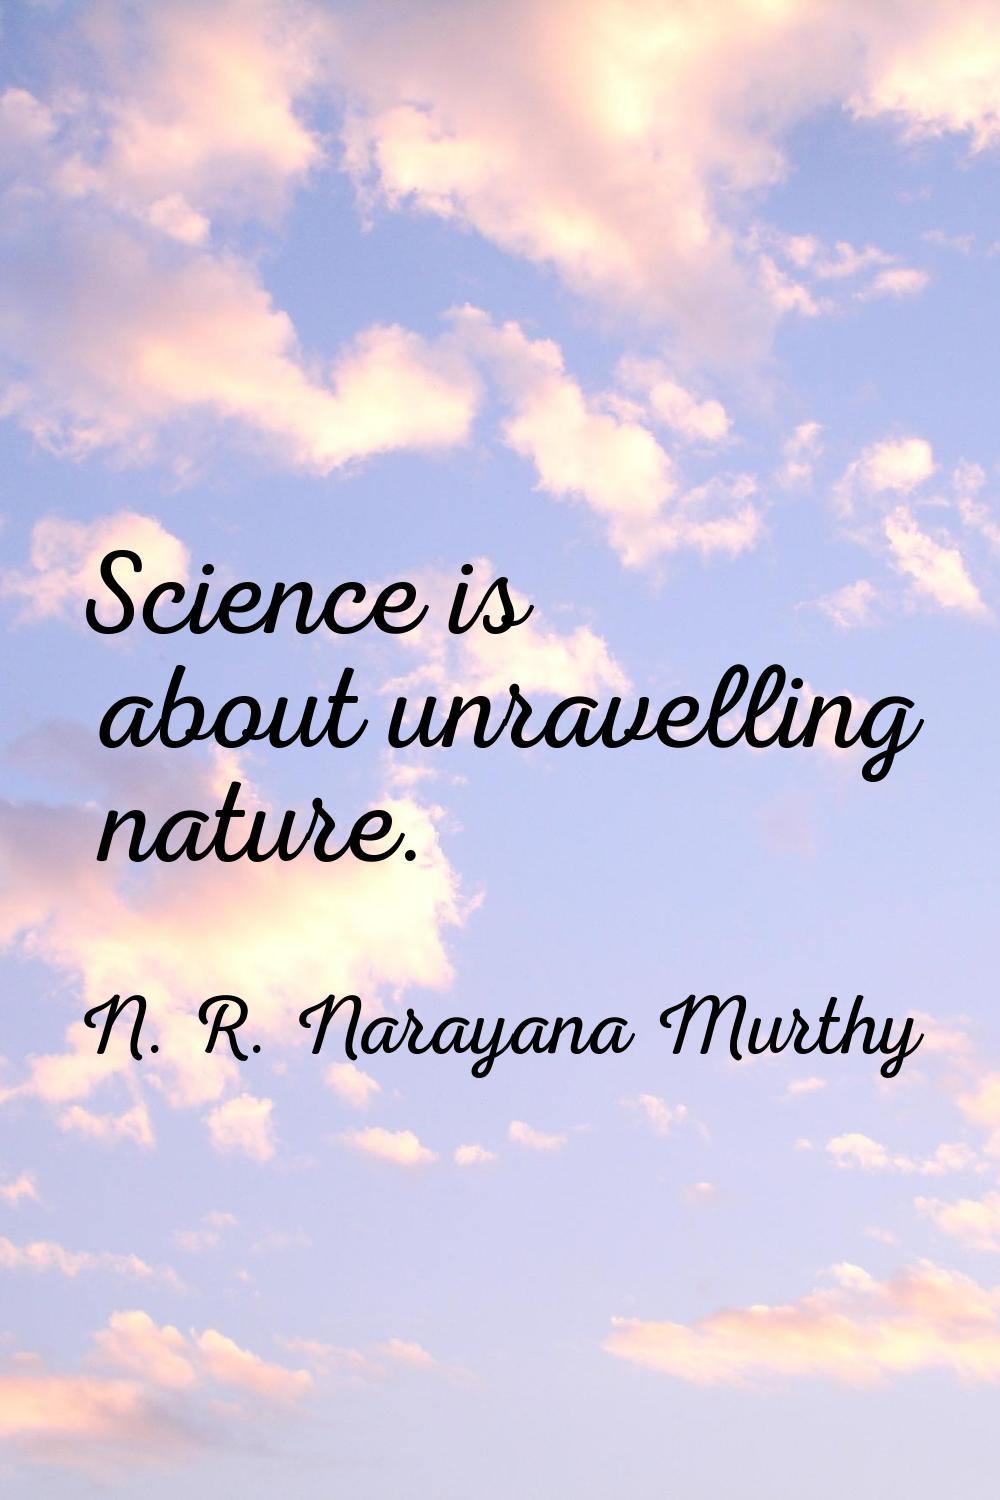 Science is about unravelling nature.